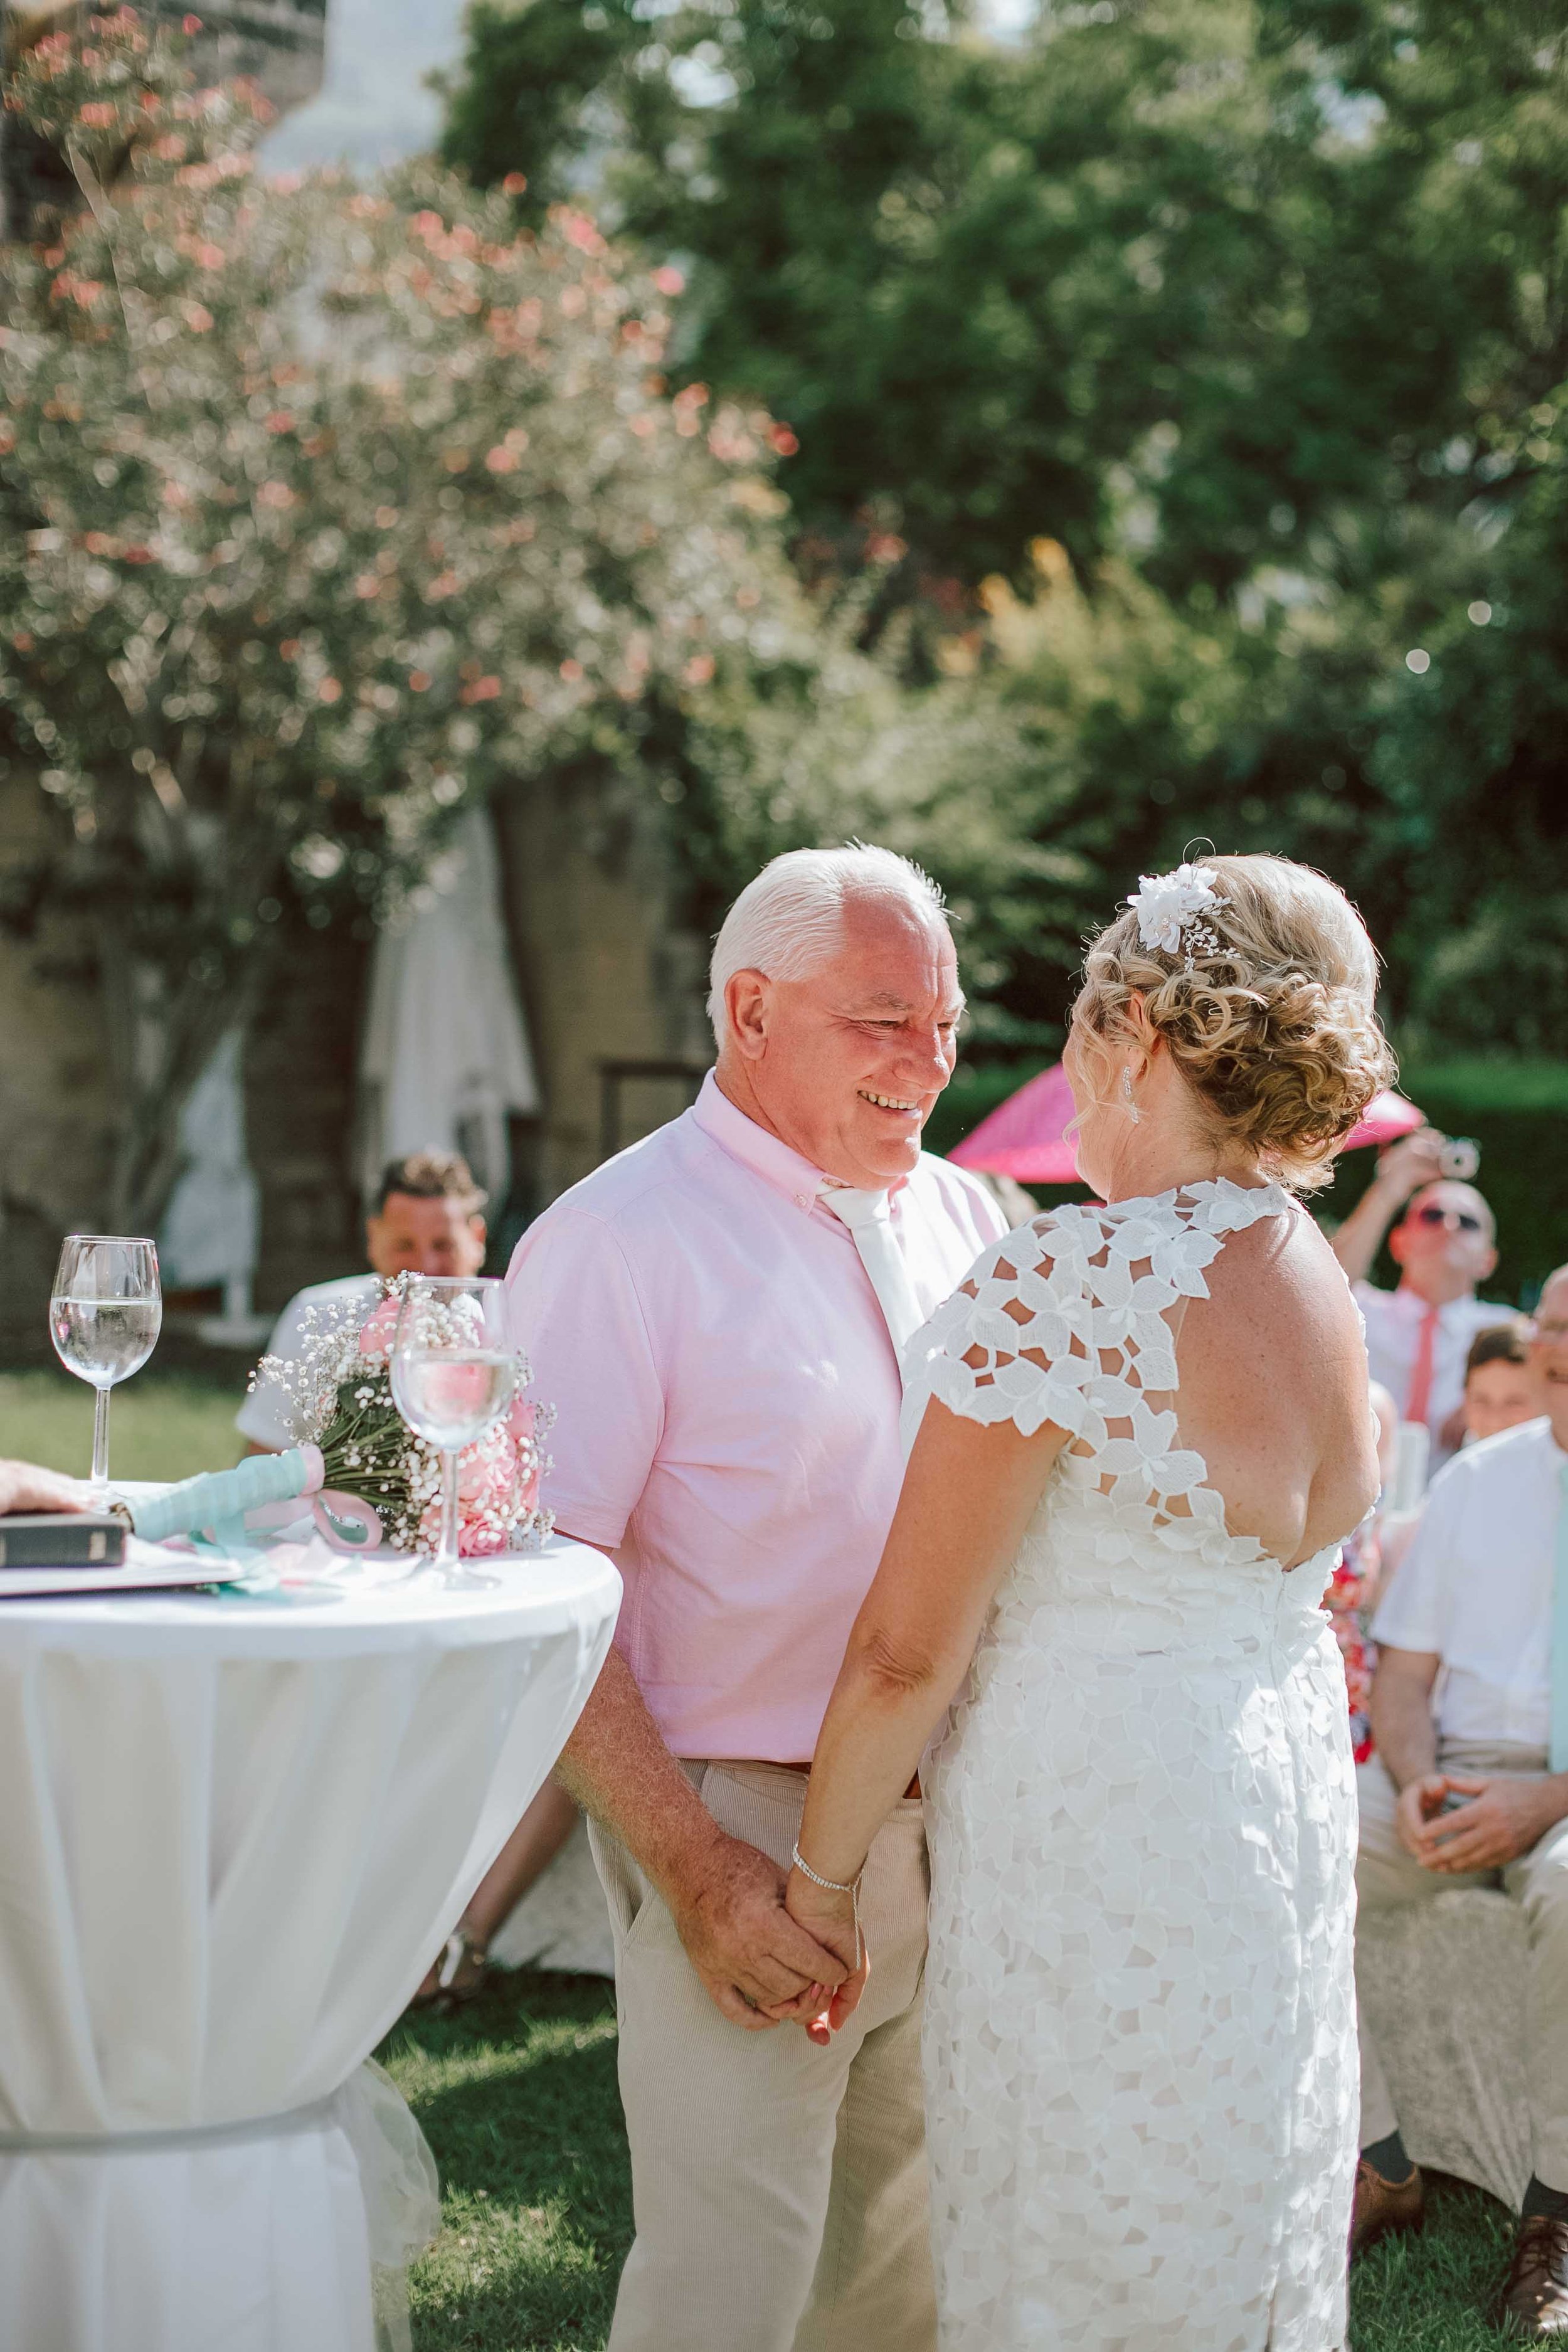 Getting married at Bellapais Abbey, Cyprus